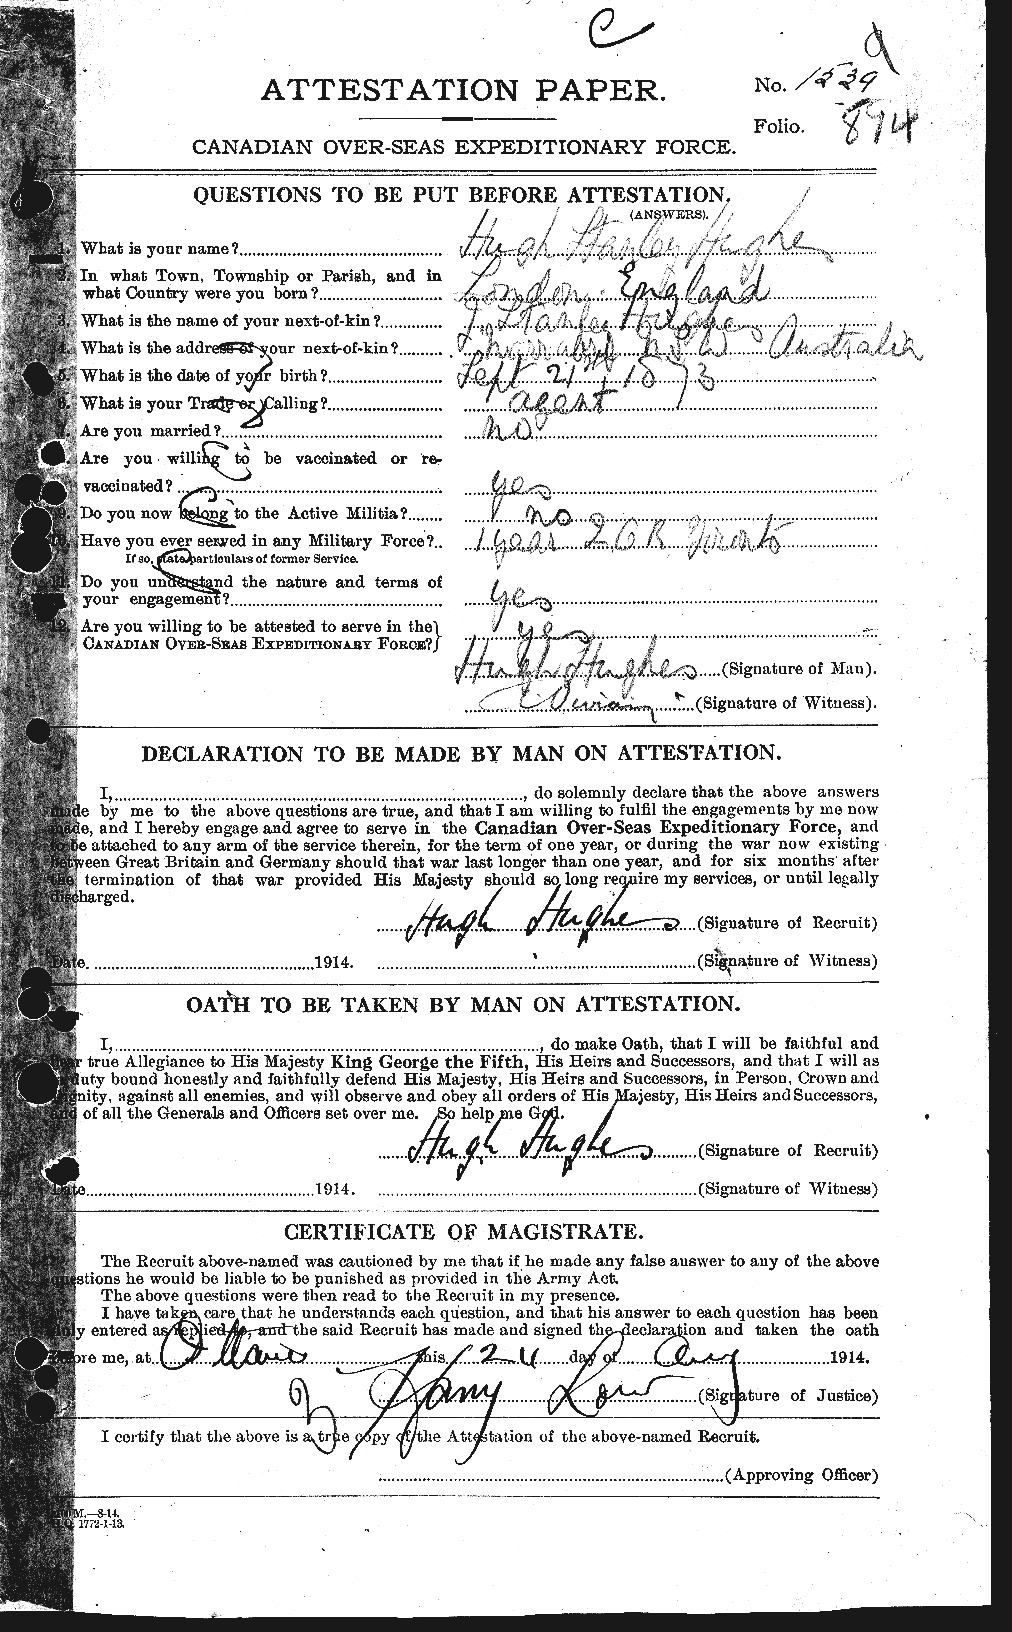 Personnel Records of the First World War - CEF 403928a